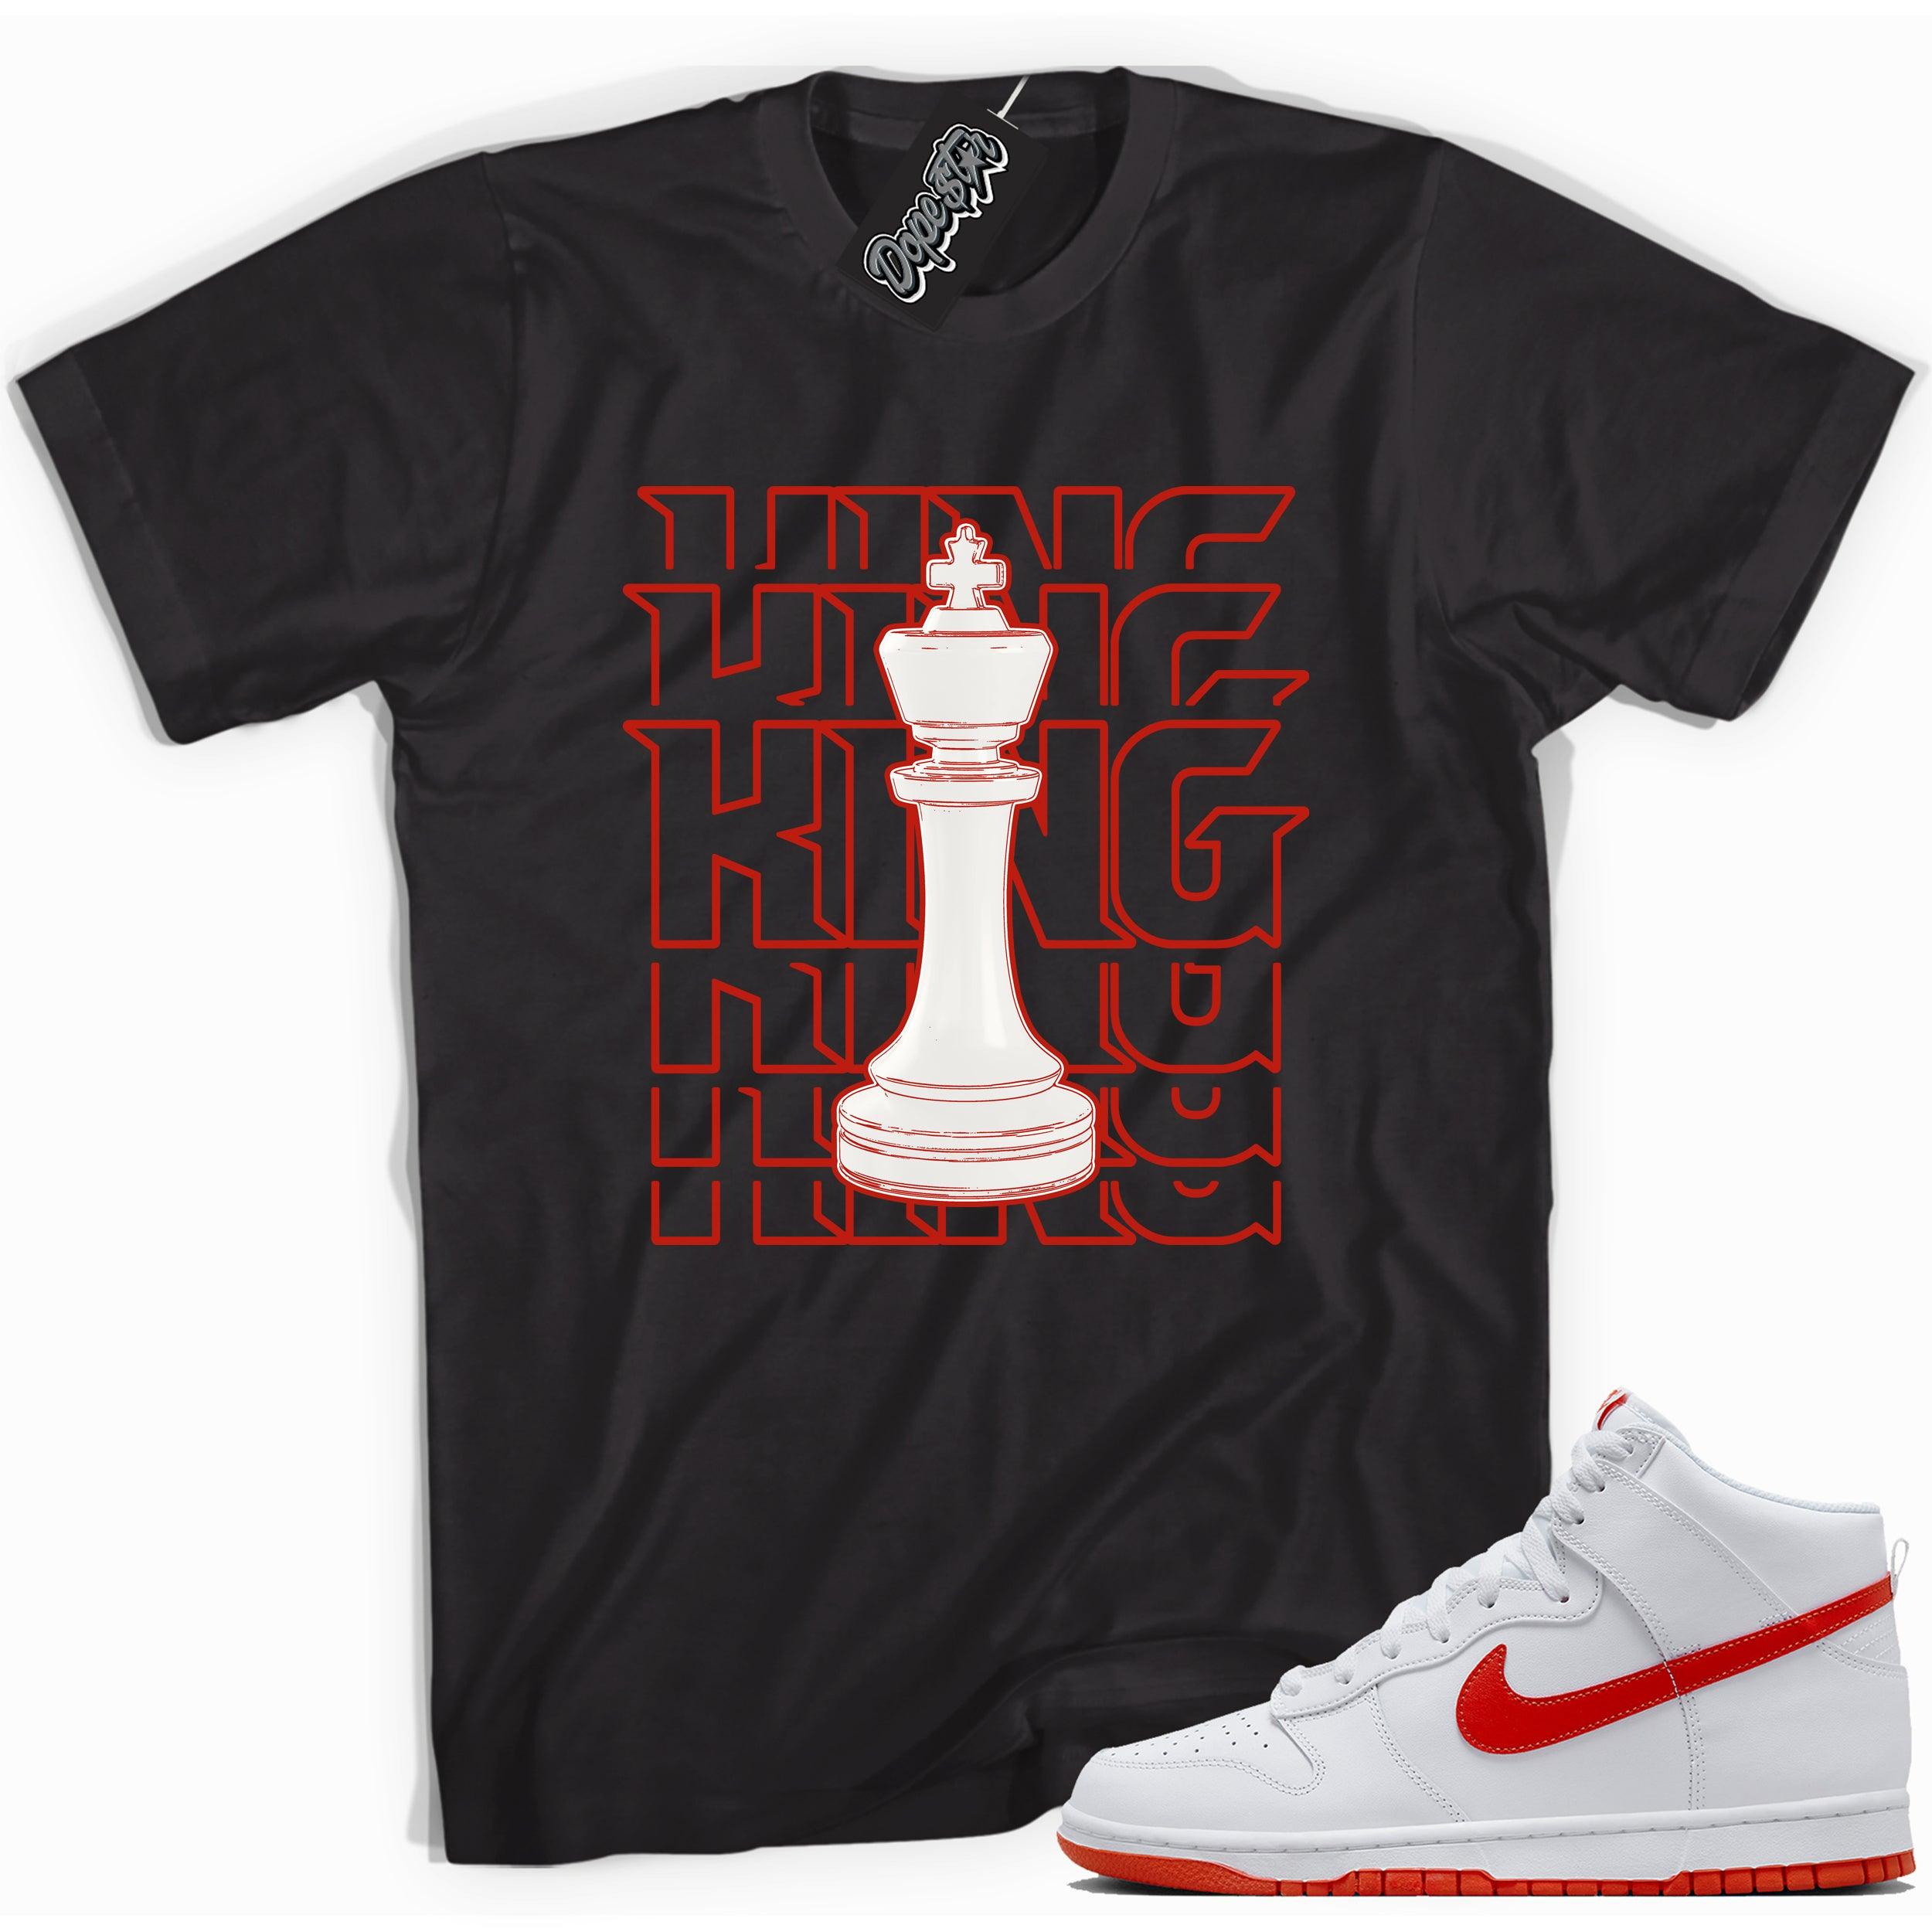 Cool black graphic tee with 'King' print, that perfectly matches Nike Dunk High White Picante Red sneakers.